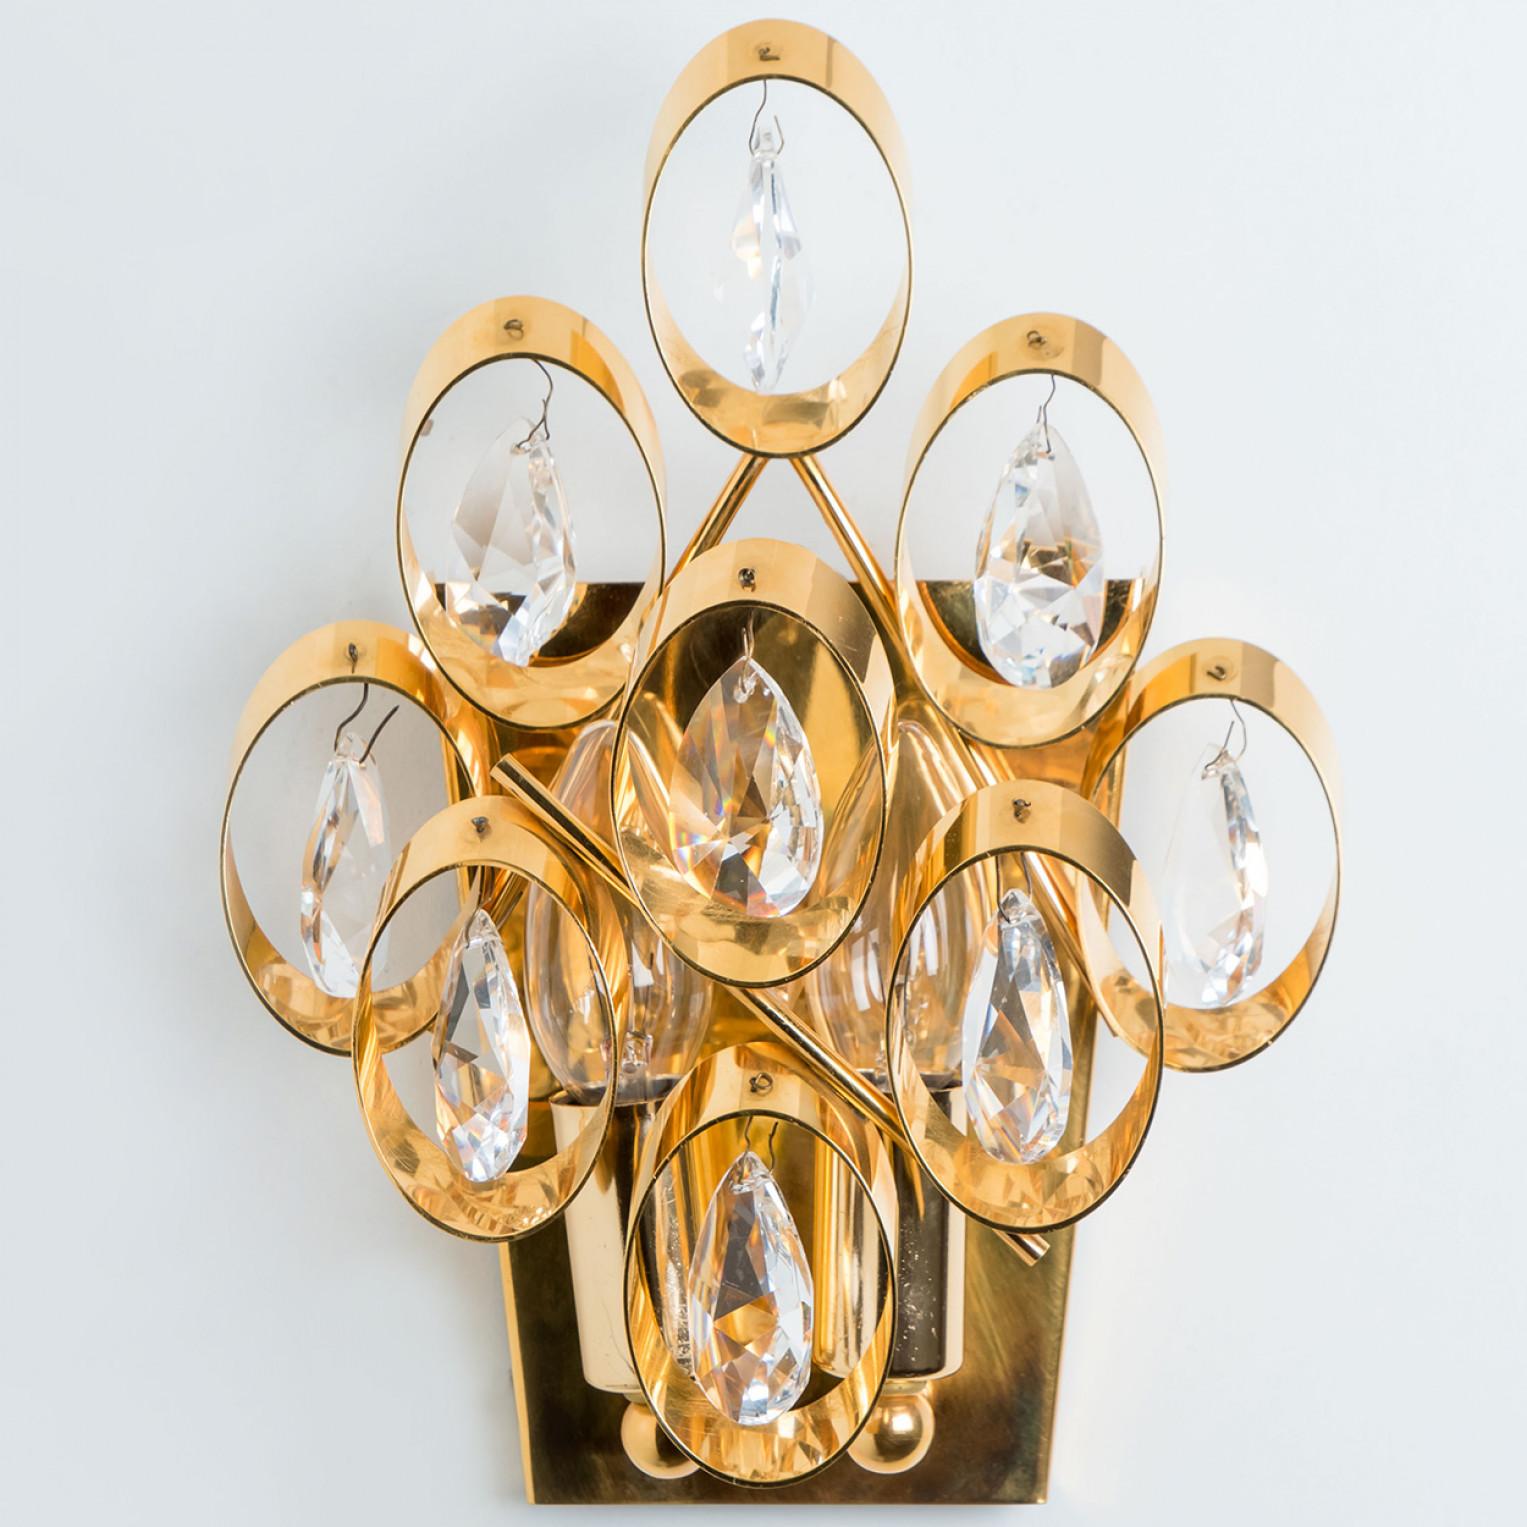 Pair of sculptural wall light has the design of a multitude of golden rings with crystals hanging and are from the historical lighting company Ernst Palme.

Dimensions:
Height: 11.81